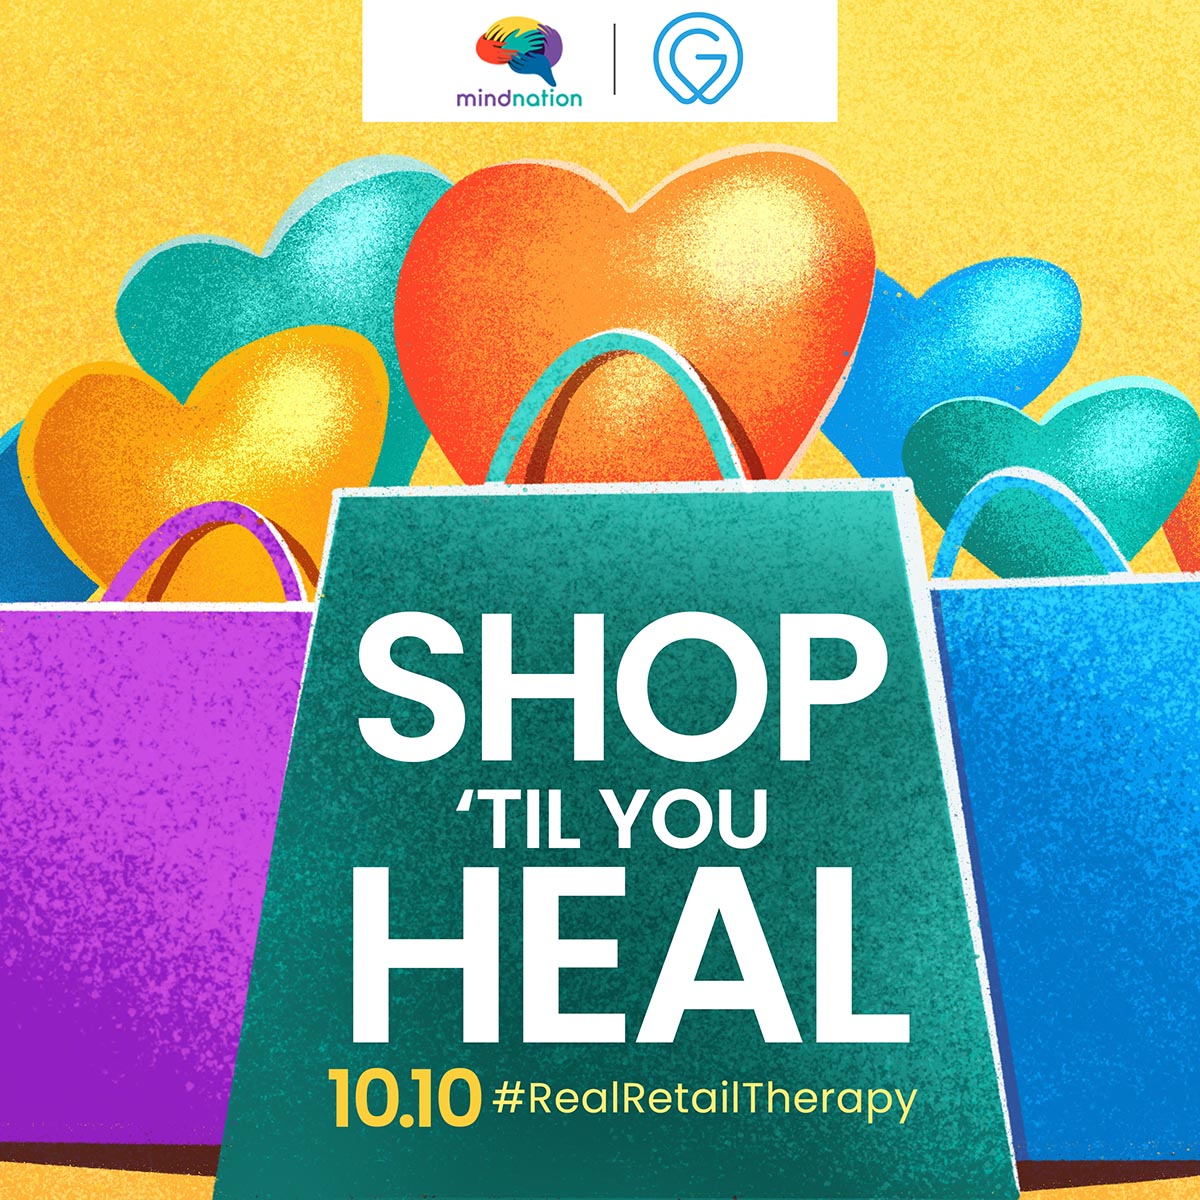 Shop ‘til You Heal This 10.10 with MindNation!